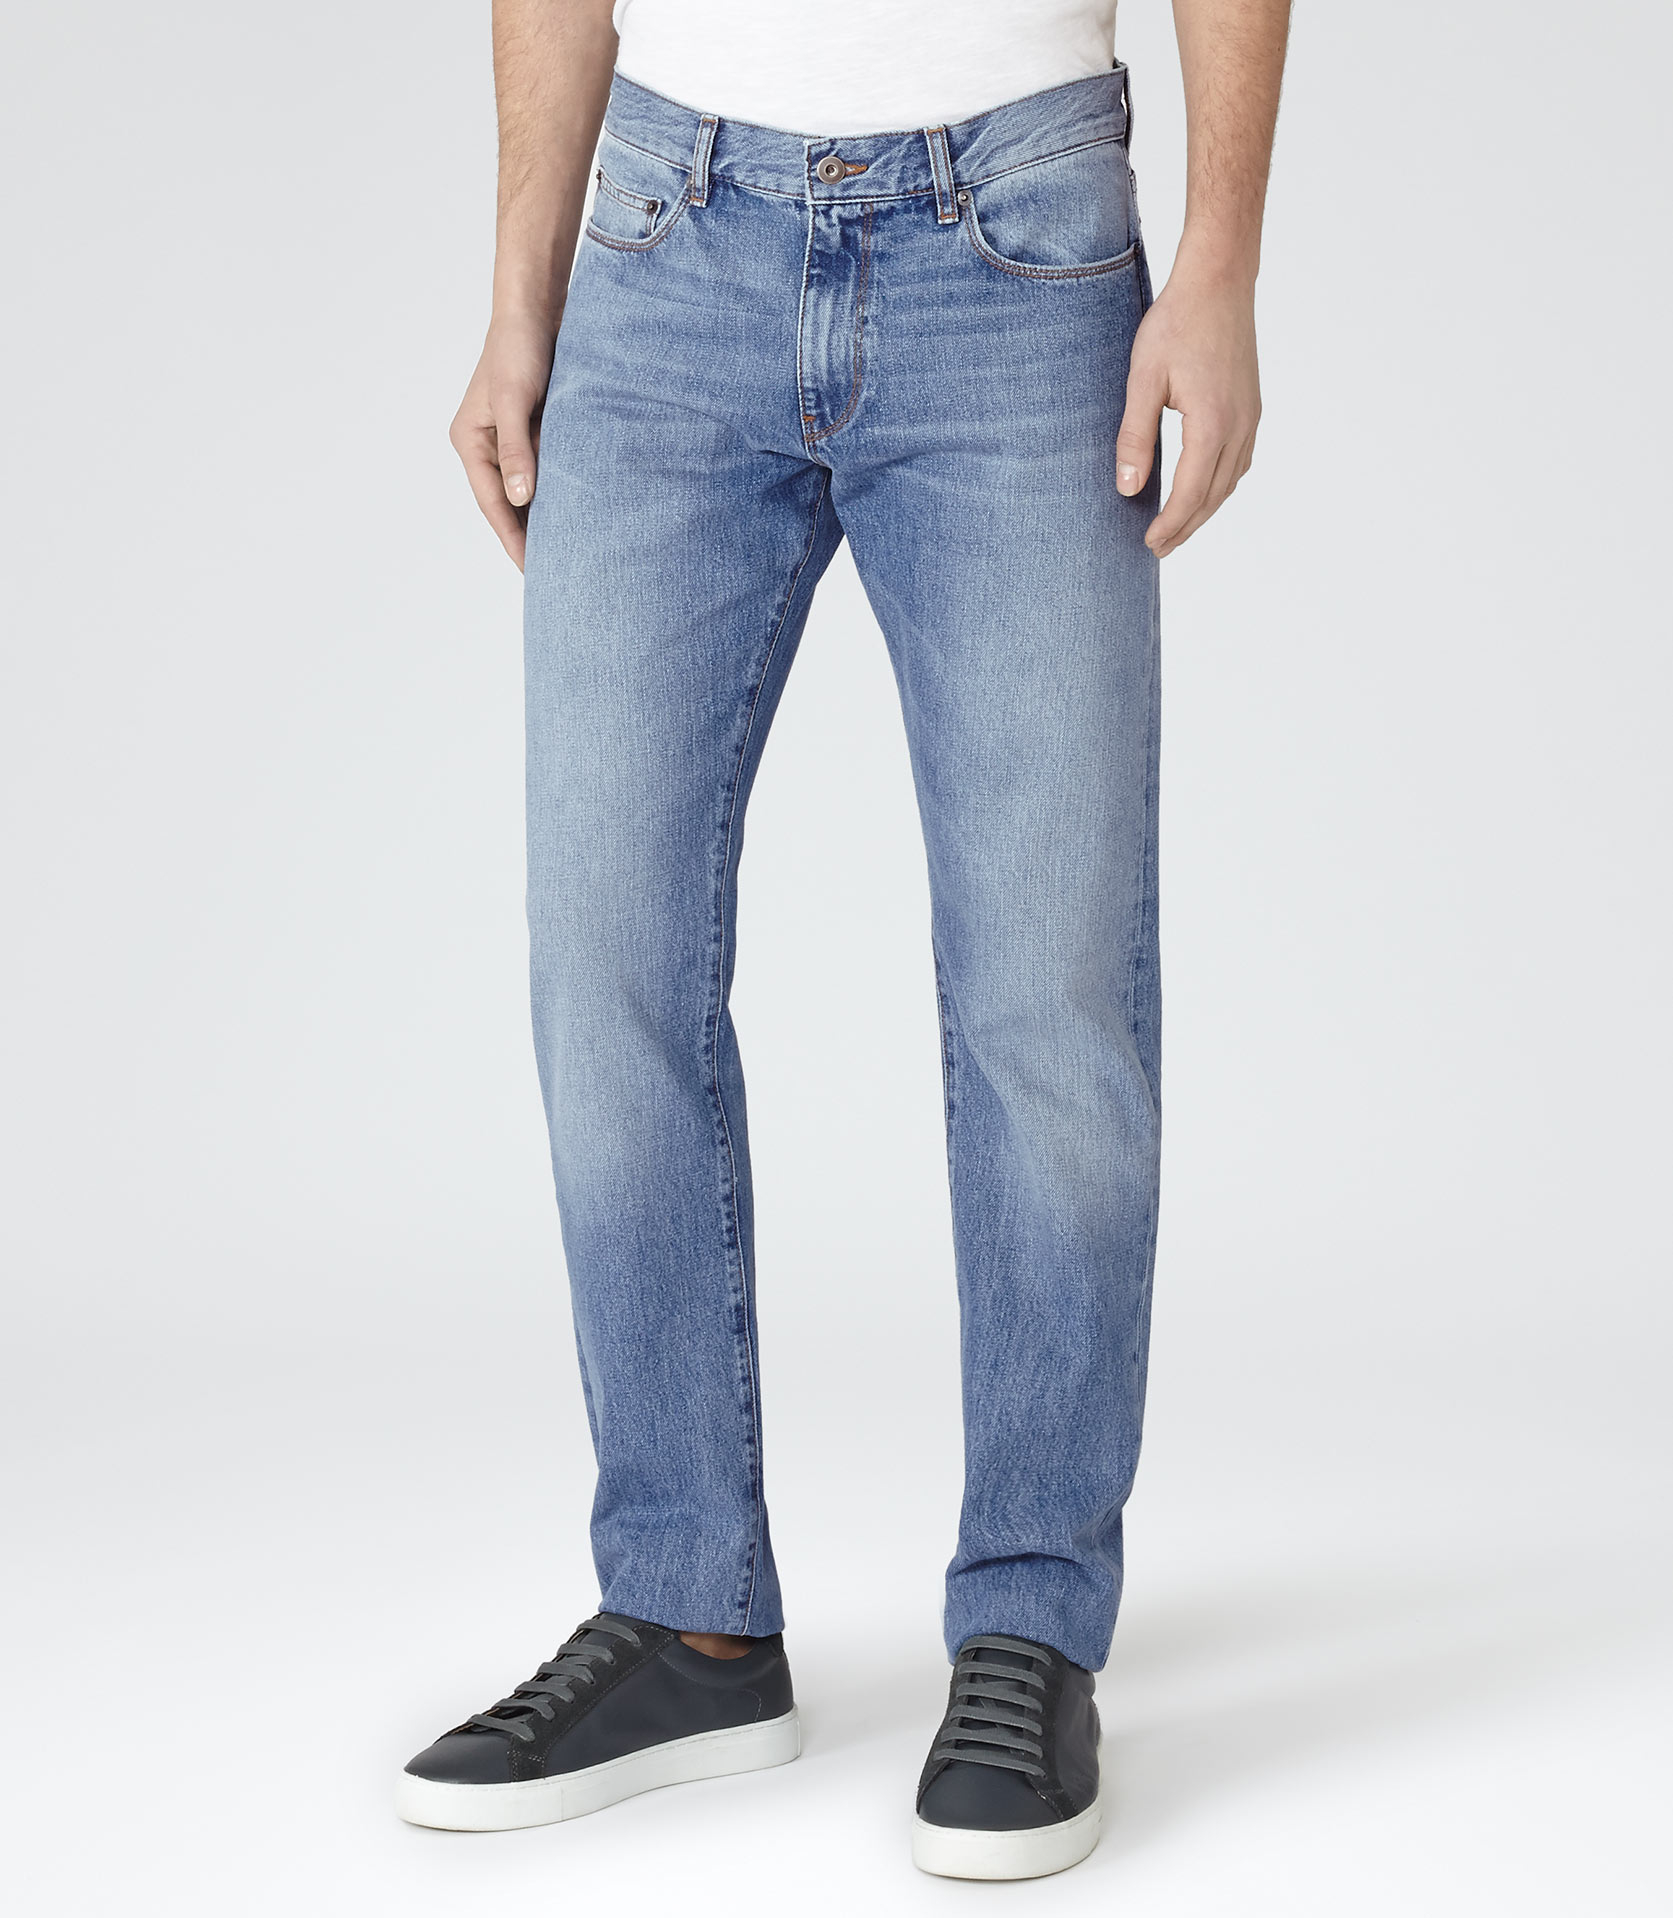 Lyst - Reiss Southland Light Straight-fit Jeans in Blue for Men